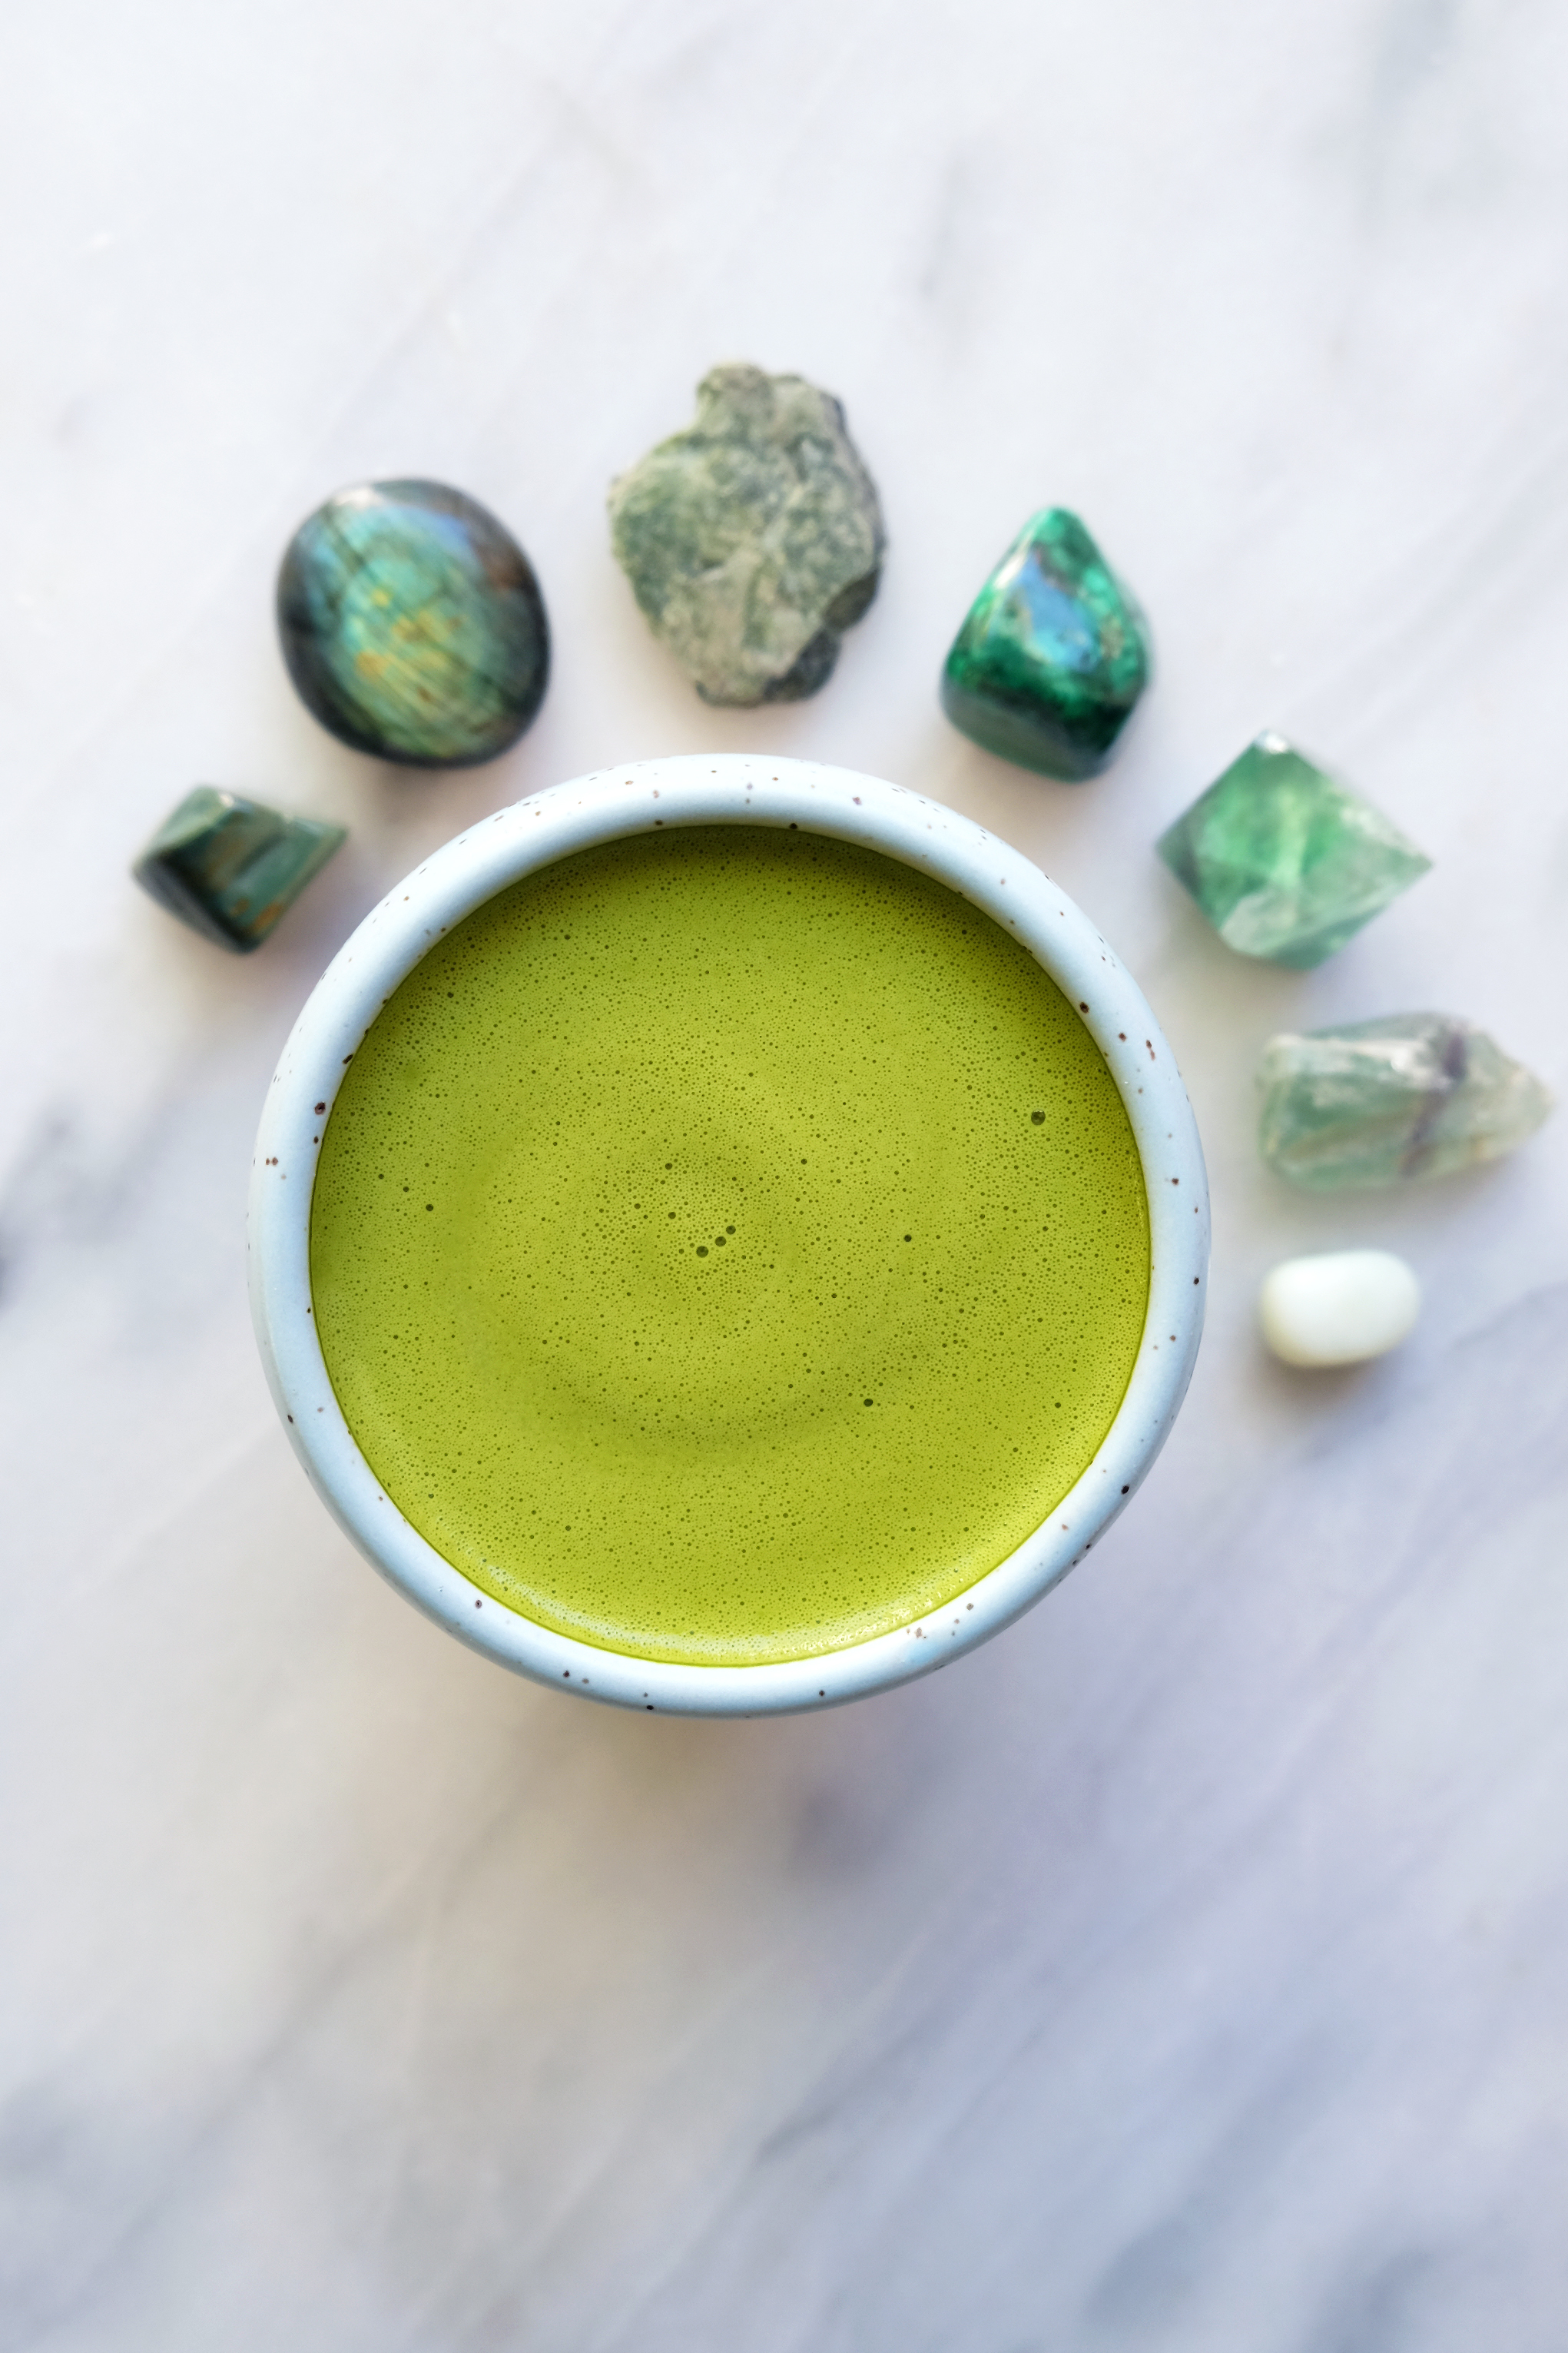 Lucabe Coffee Co. - Our Matcha Blender is more than meets the eye. What is  matcha? Just in case the intriguing traditional tea ceremony wasn't  persuasive enough, here are health reasons why